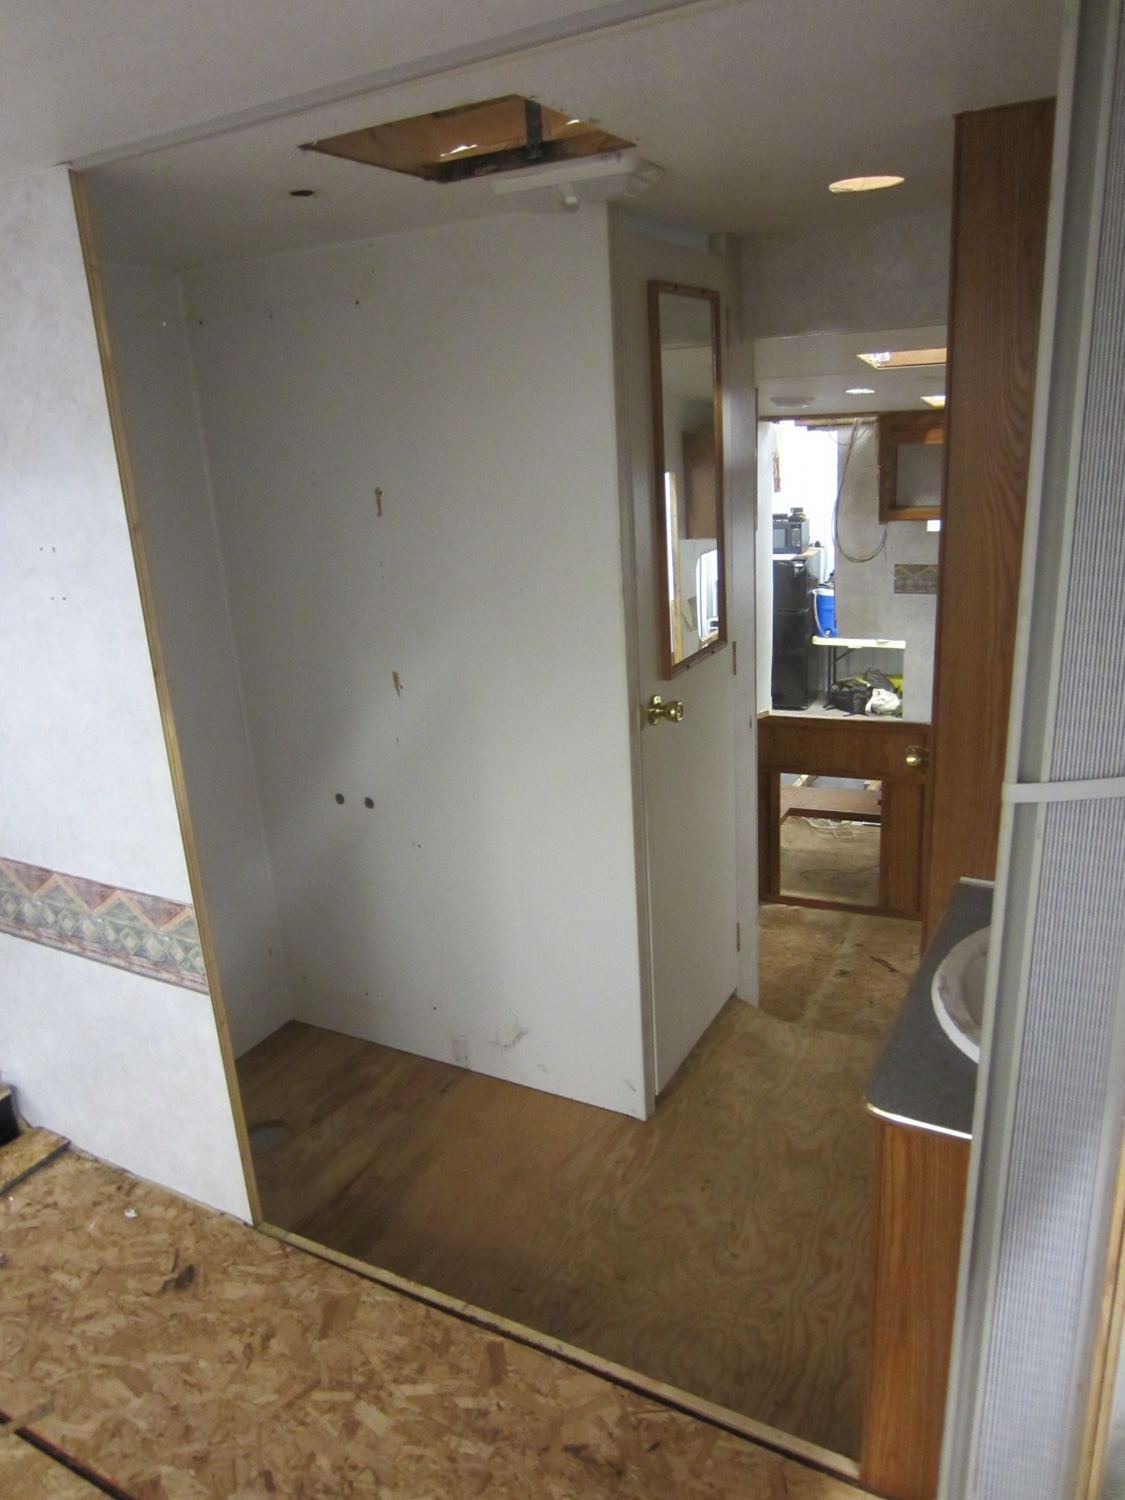  This is what the bathroom area used to look like. The shower was separated from the bedroom by a protruding wall on the left. An accordion door by the sink separated the sleeping and bathroom areas, and there was a door to the toilet. 